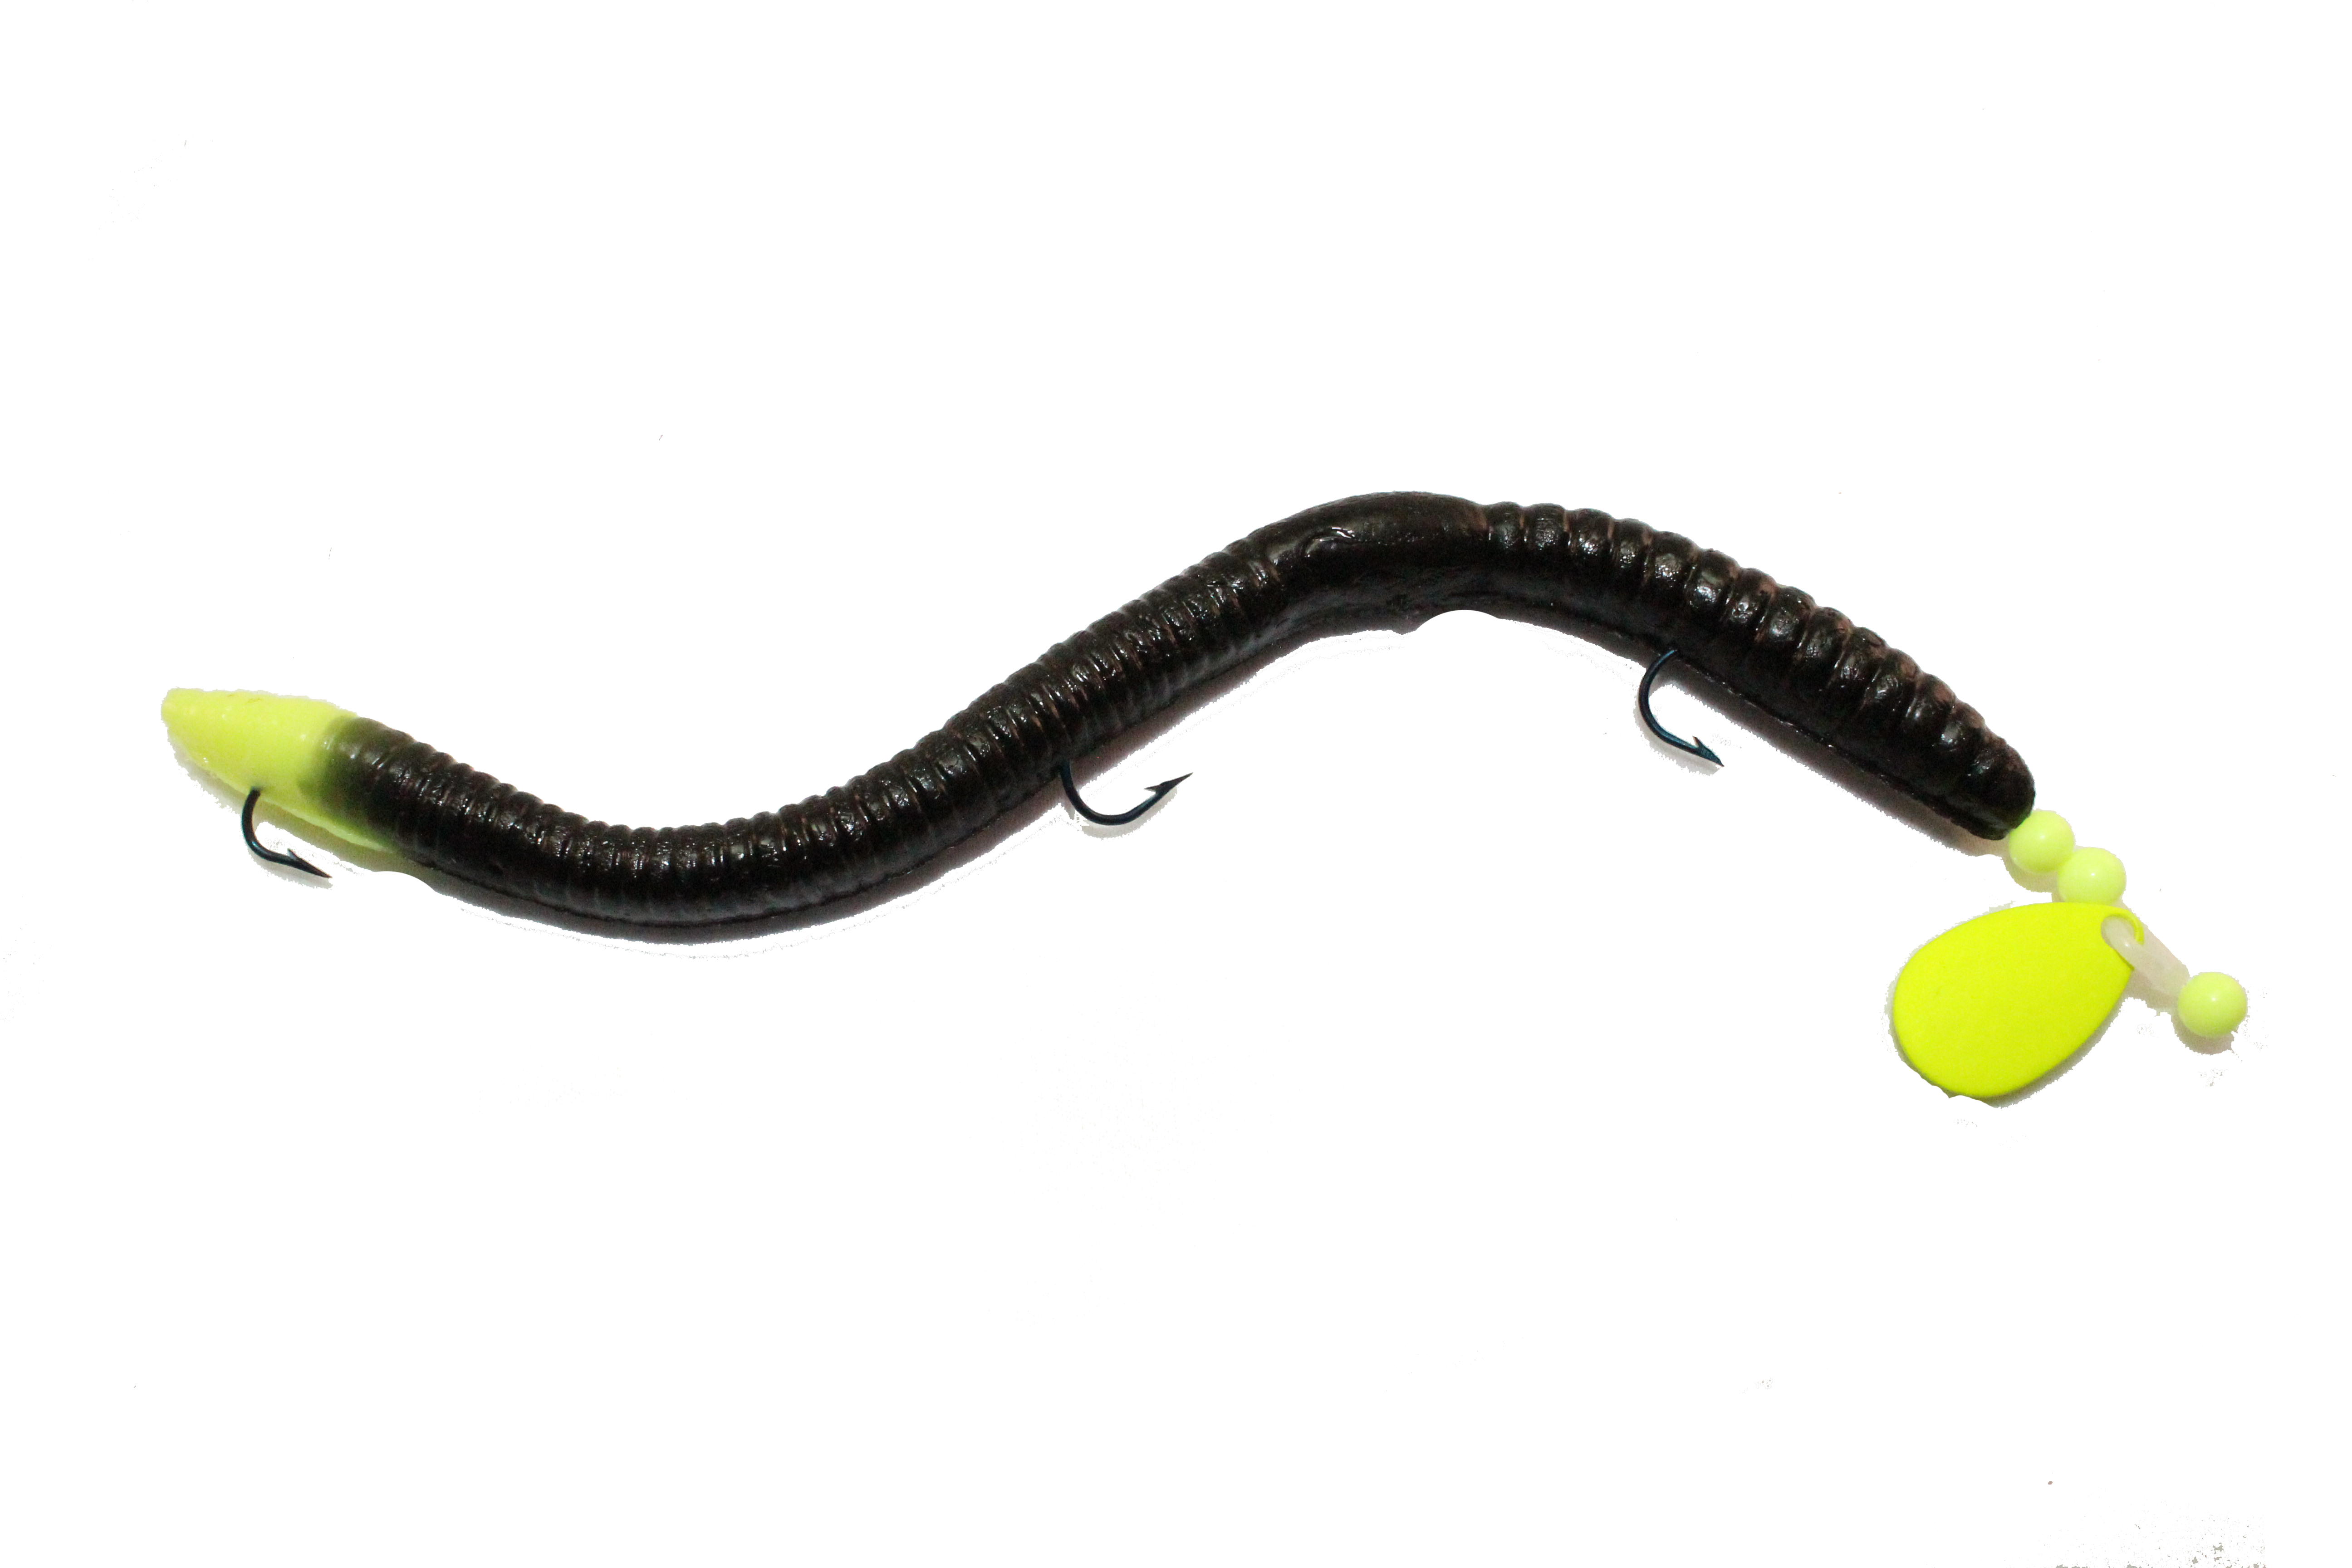 WALLEYE SPINNER RIG - BLACK/CHART TAIL & BLADE - IKE-CON Fishing